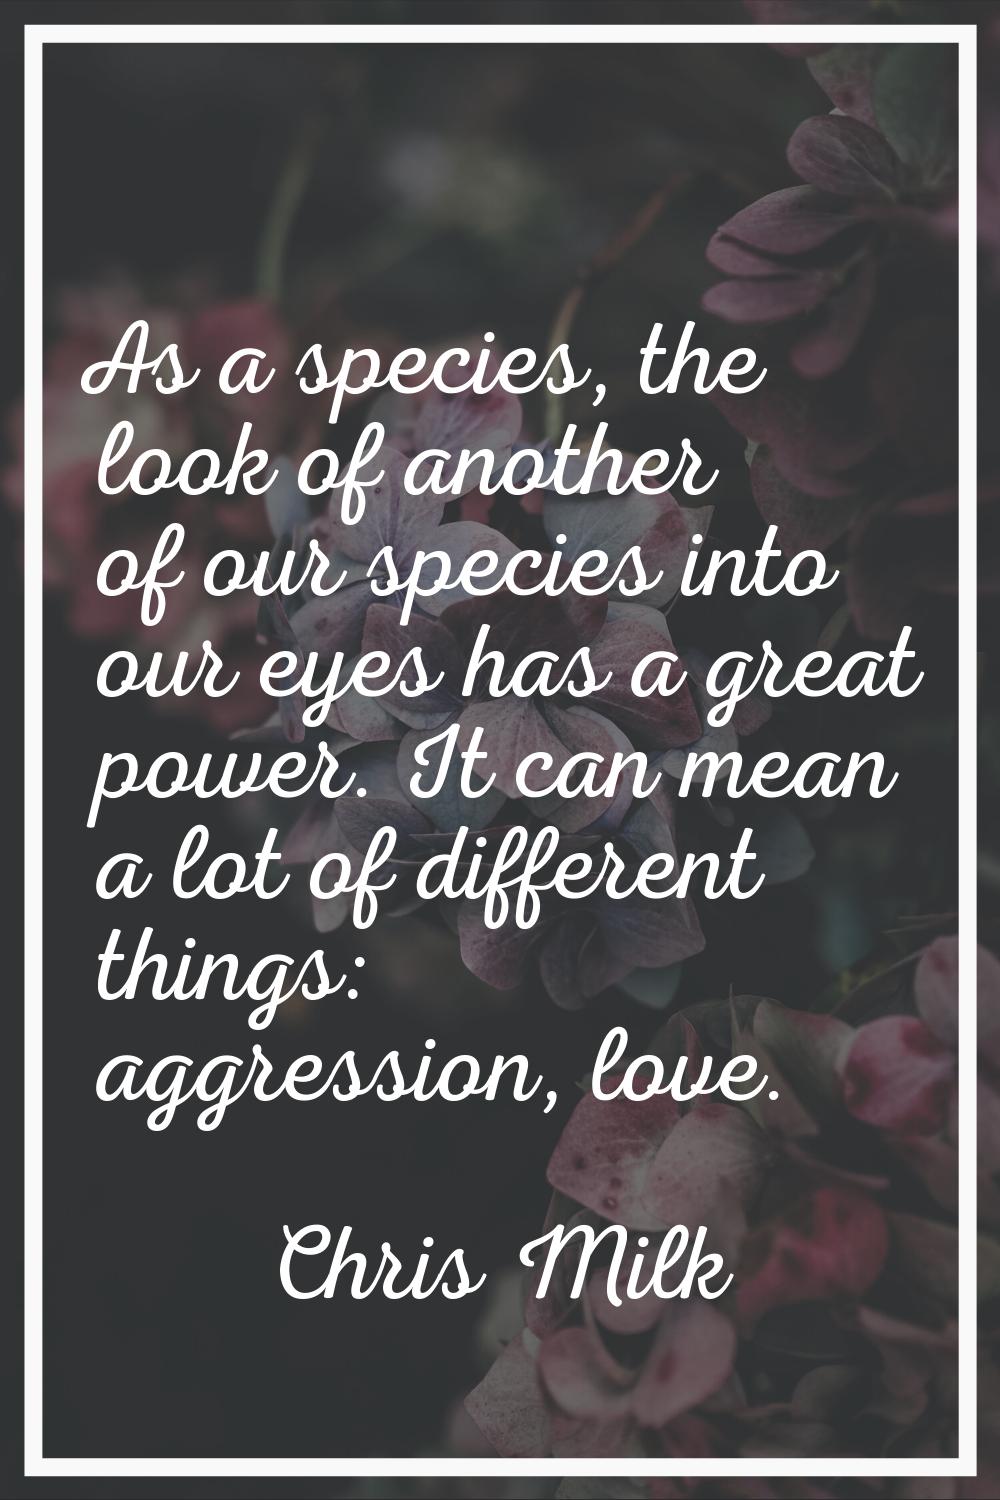 As a species, the look of another of our species into our eyes has a great power. It can mean a lot